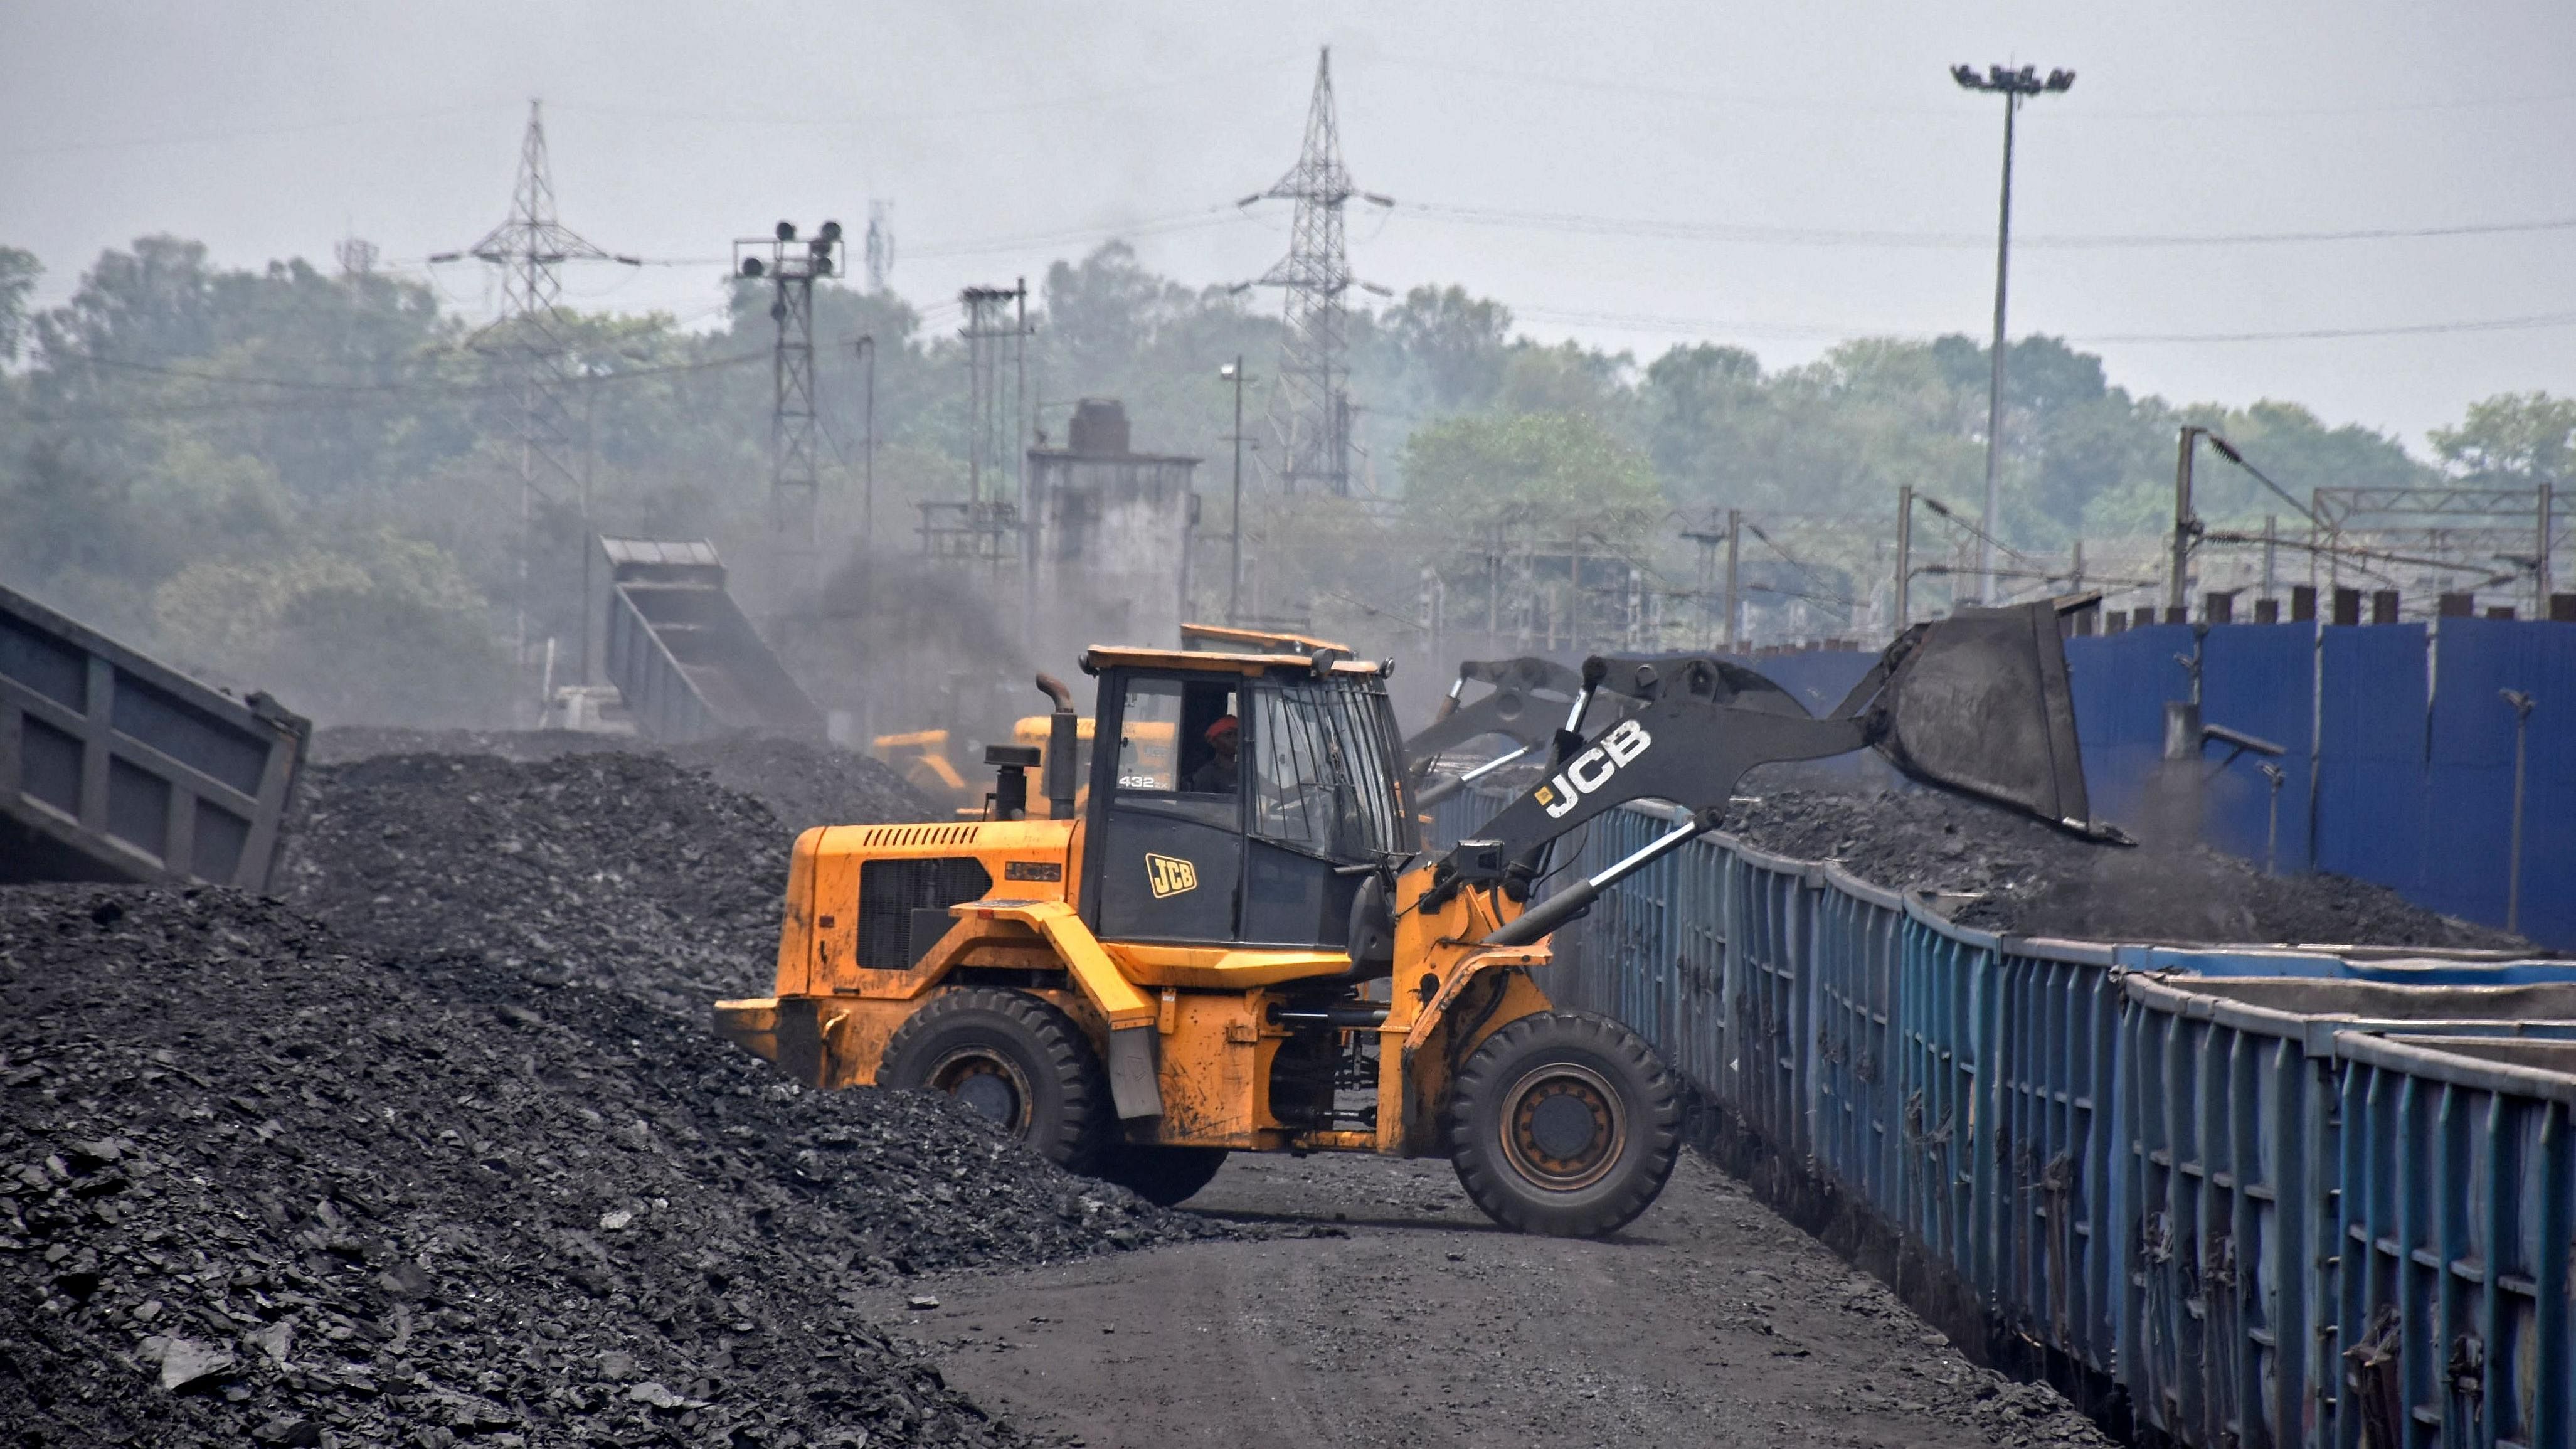 India has stepped up pressure on utilities to increase imports in recent days, warning of cuts to supply of domestically mined coal if power plants do not build up coal inventories through imports. Credit: AFP Photo